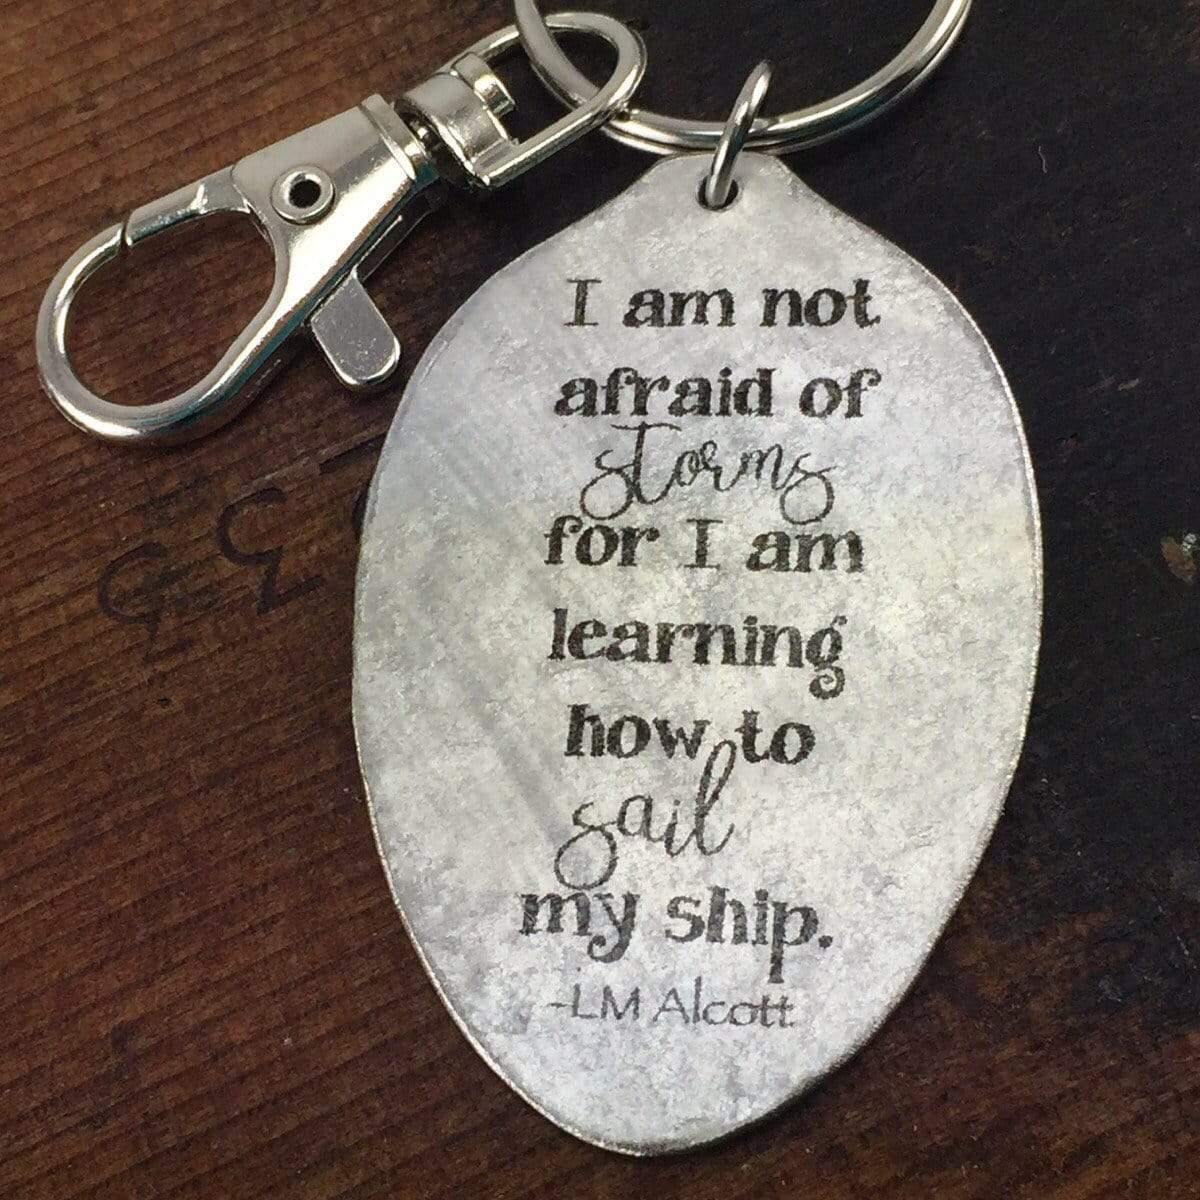 Louisa May Alcott I am not afraid of storms for I am learning how to sail my ship spoon keychain - KyleeMae Designs